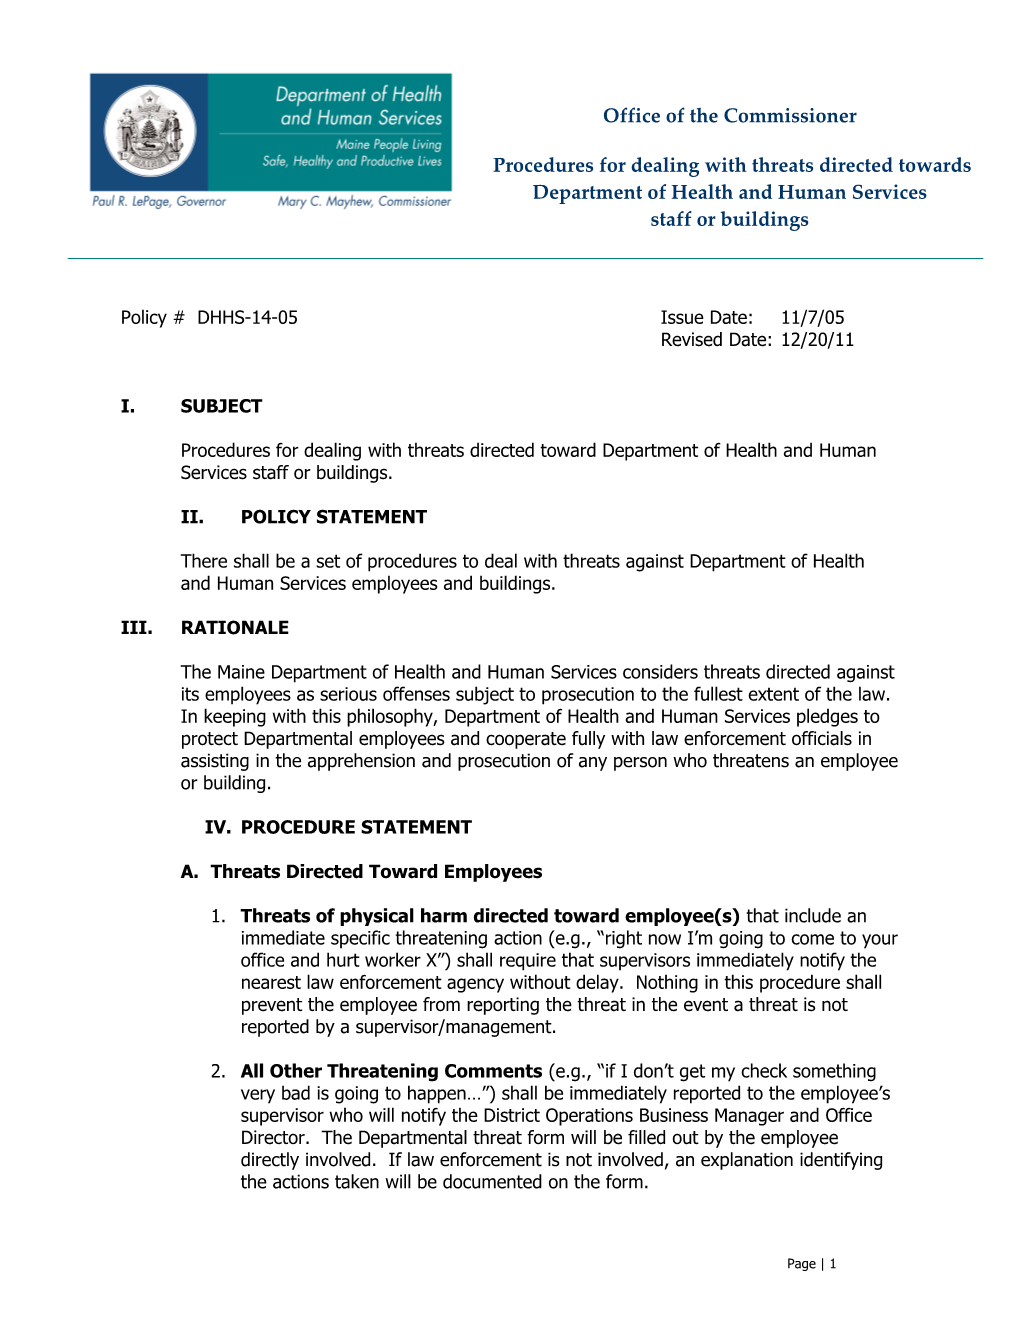 DHHS-14-05 Threat Policy Page 3